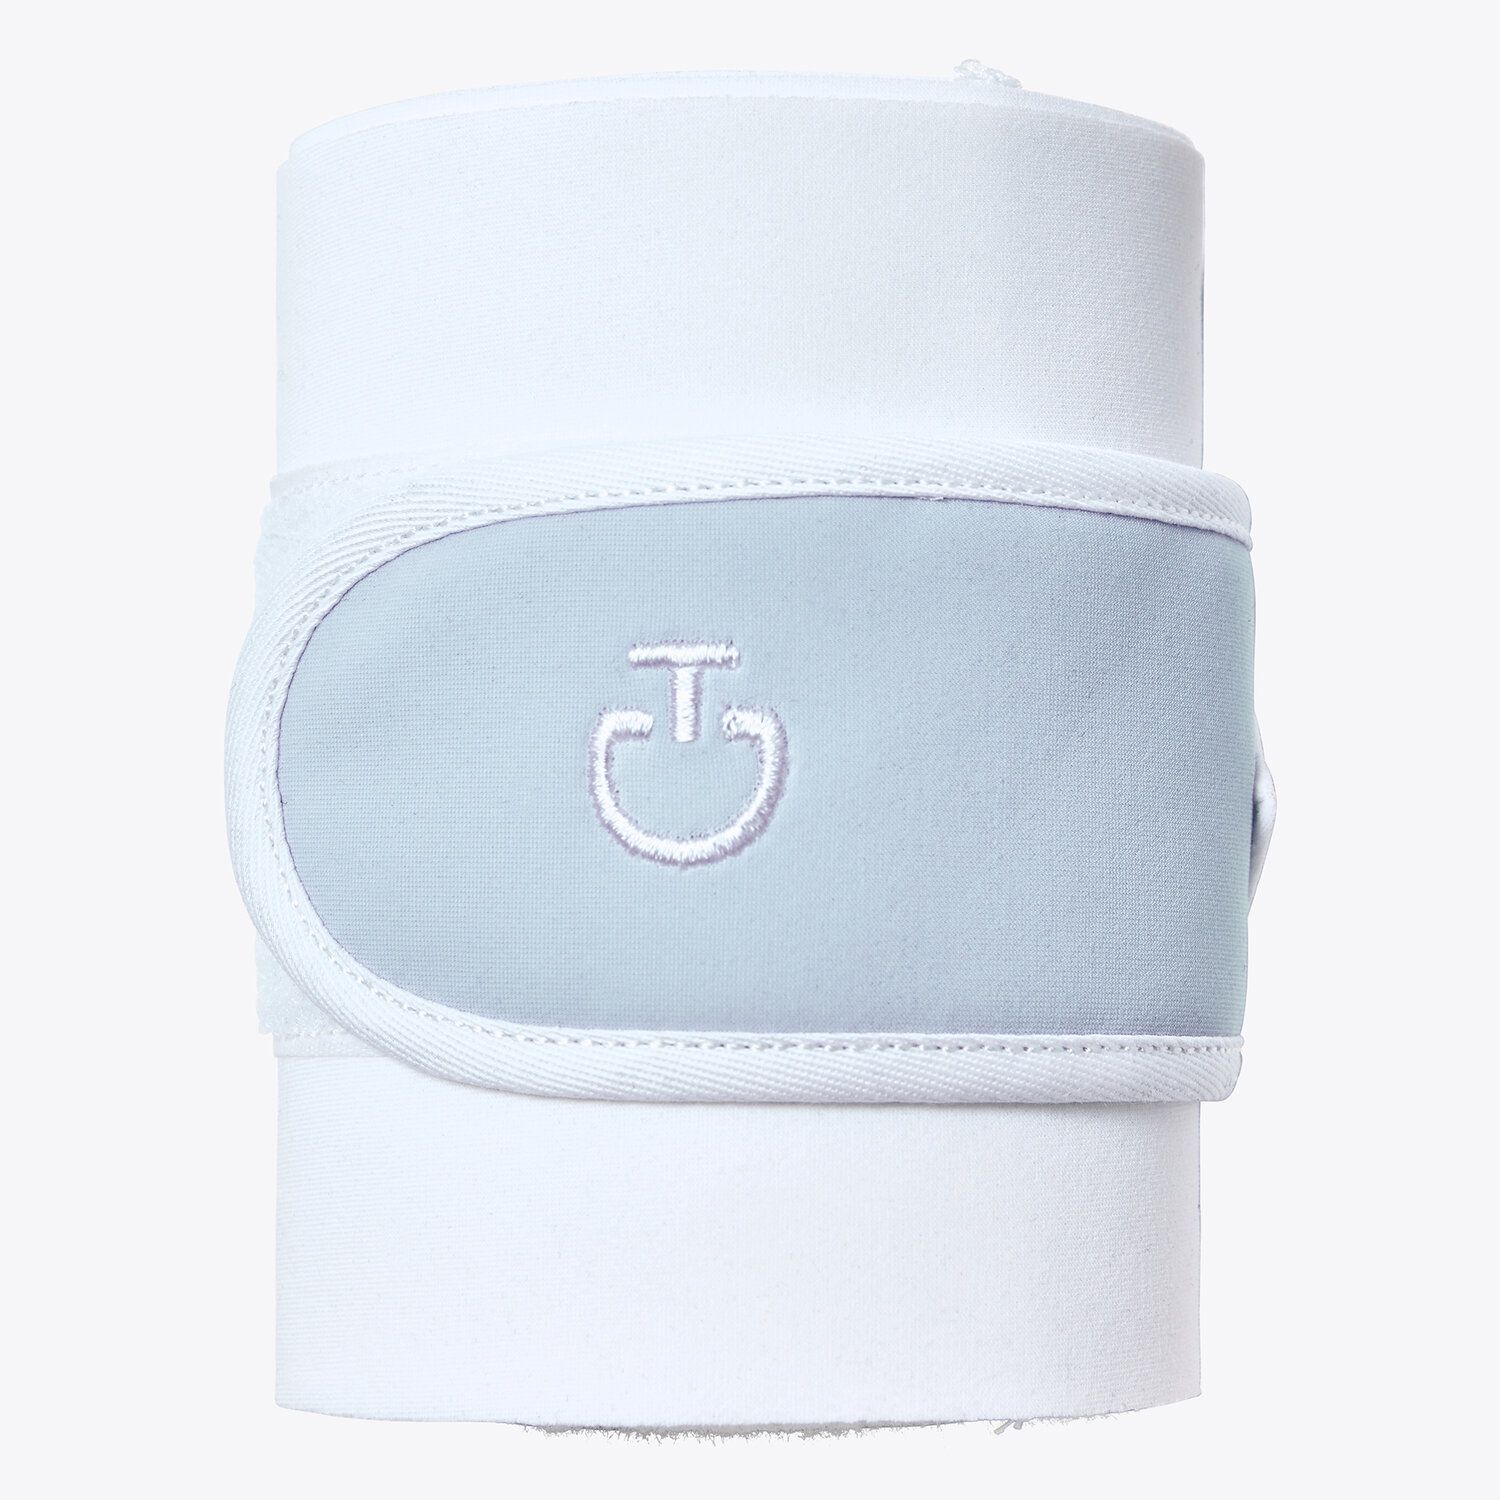 Cavalleria Toscana Set of 2 jersey and fleece bandages. WHITE / POWDER BLUE-1